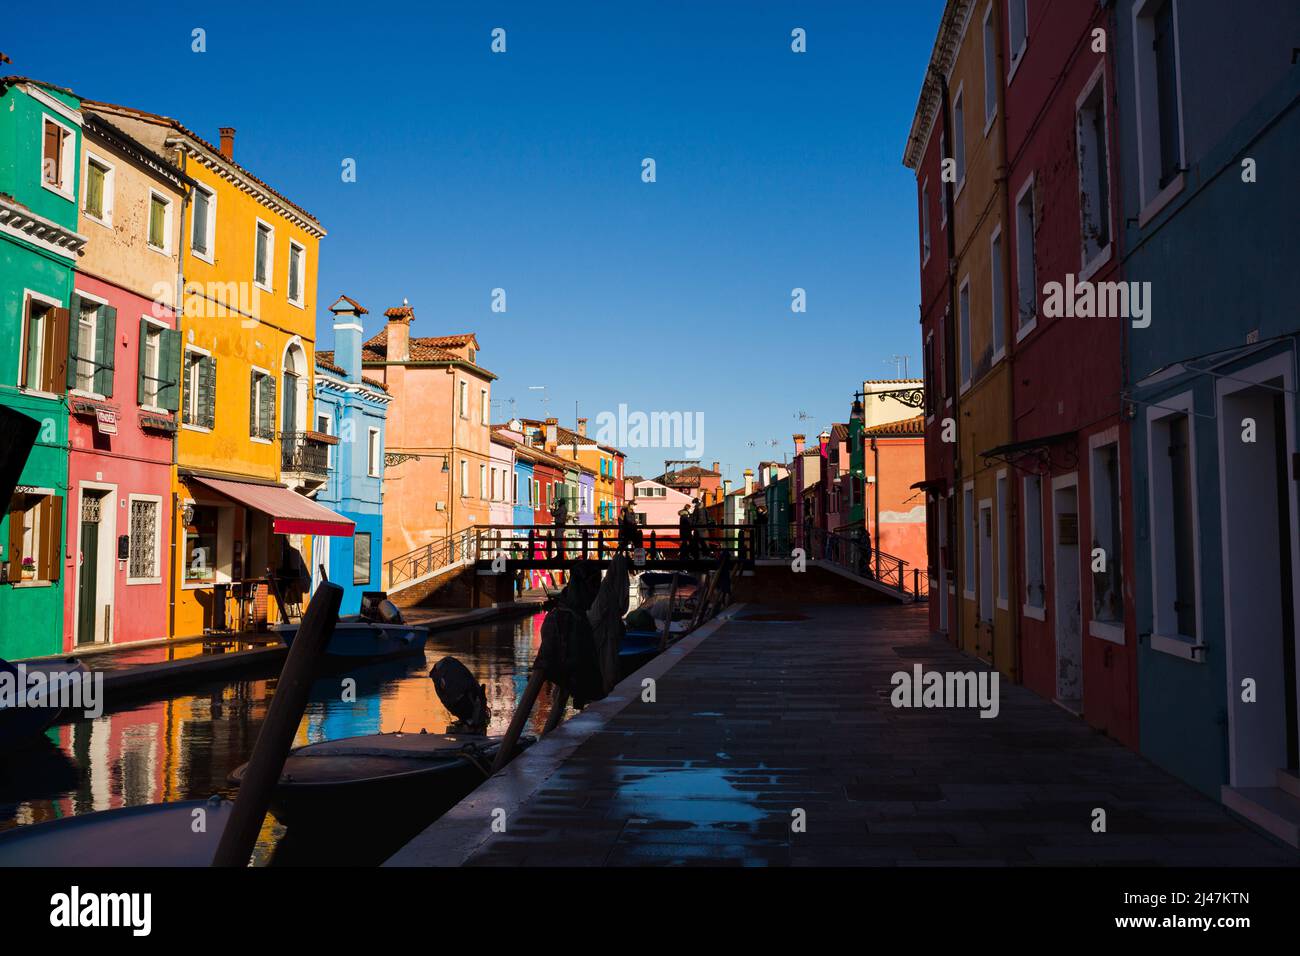 View of the Colorful houses of Burano island, Venice. italy Stock Photo